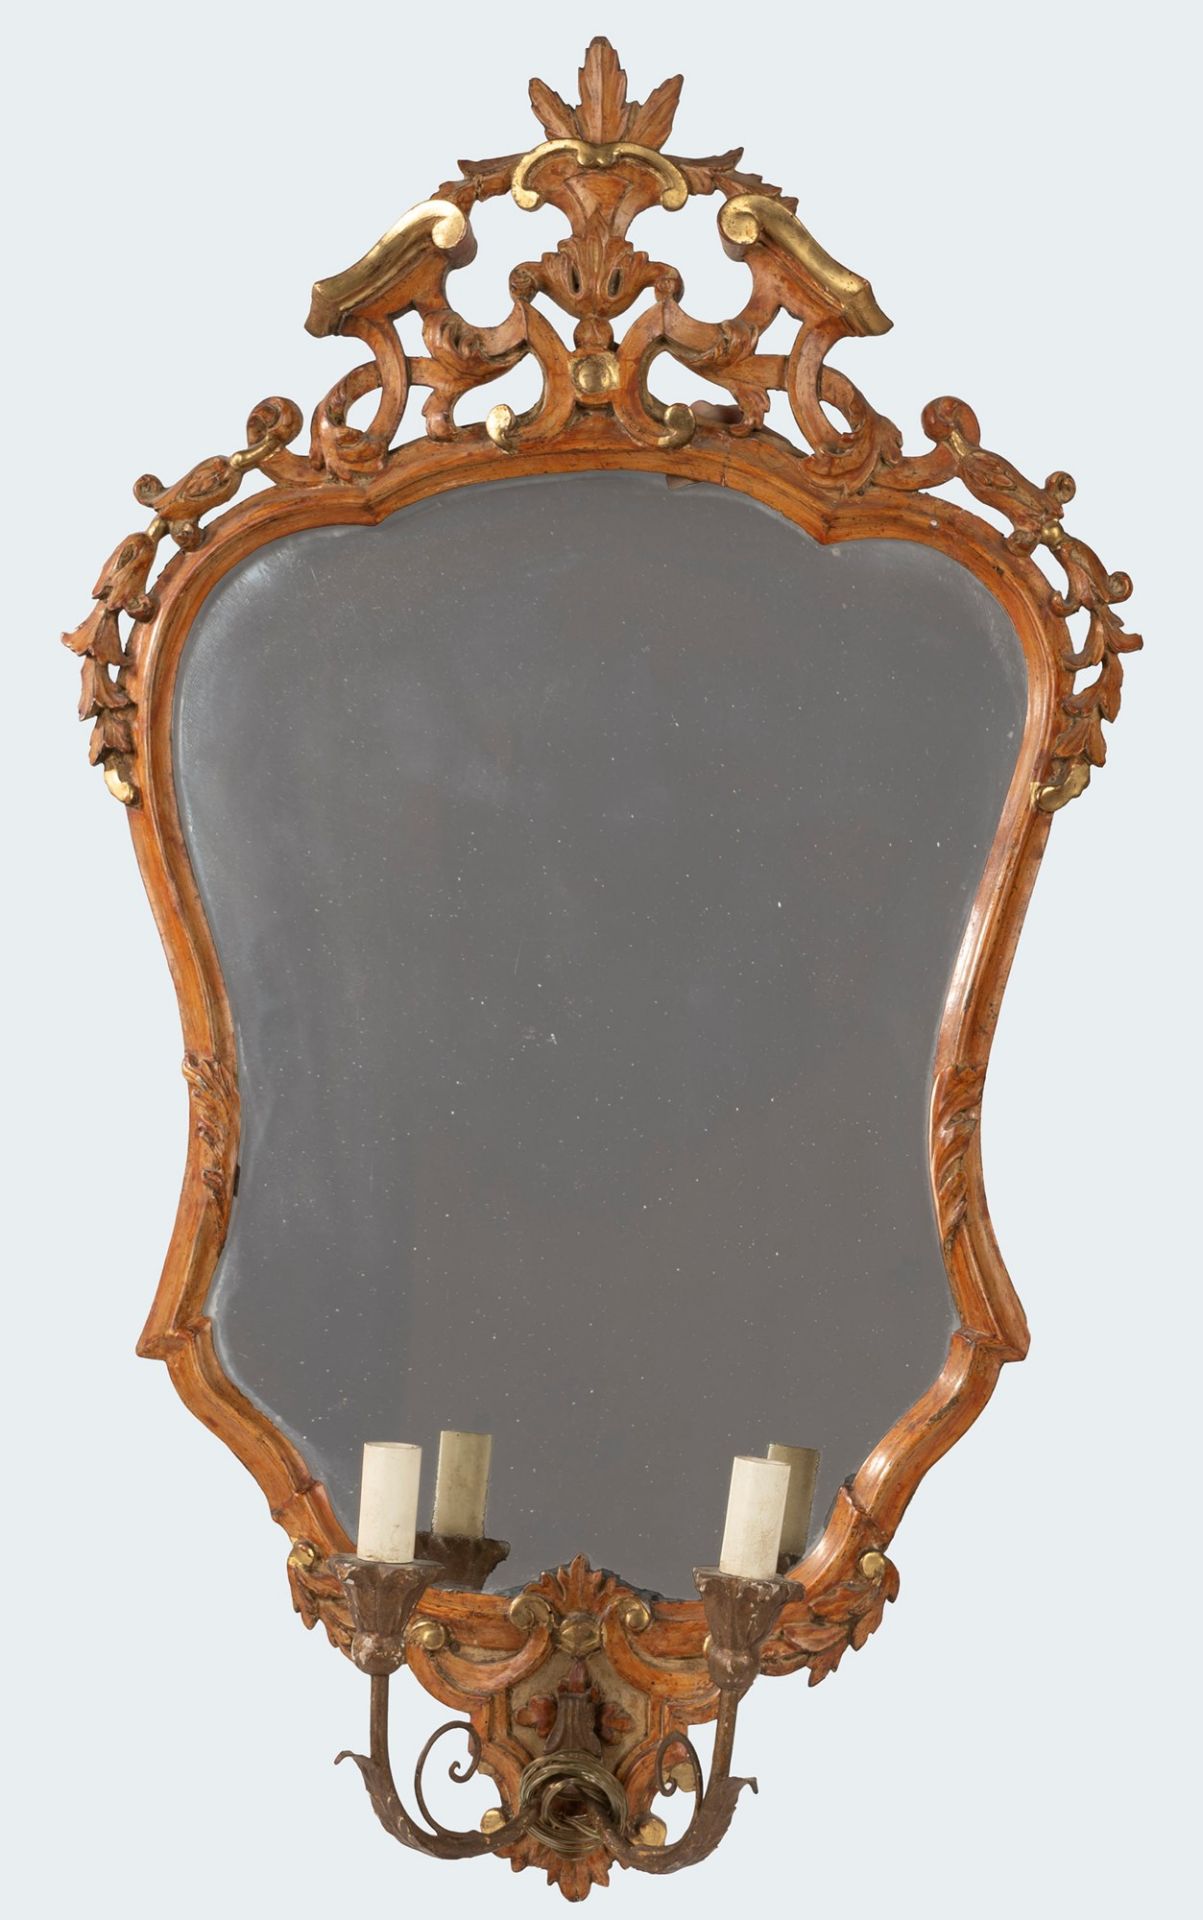 Pair of mirrors with candle holders in carved, gilded and lacquered wood, 18th century - Image 4 of 5